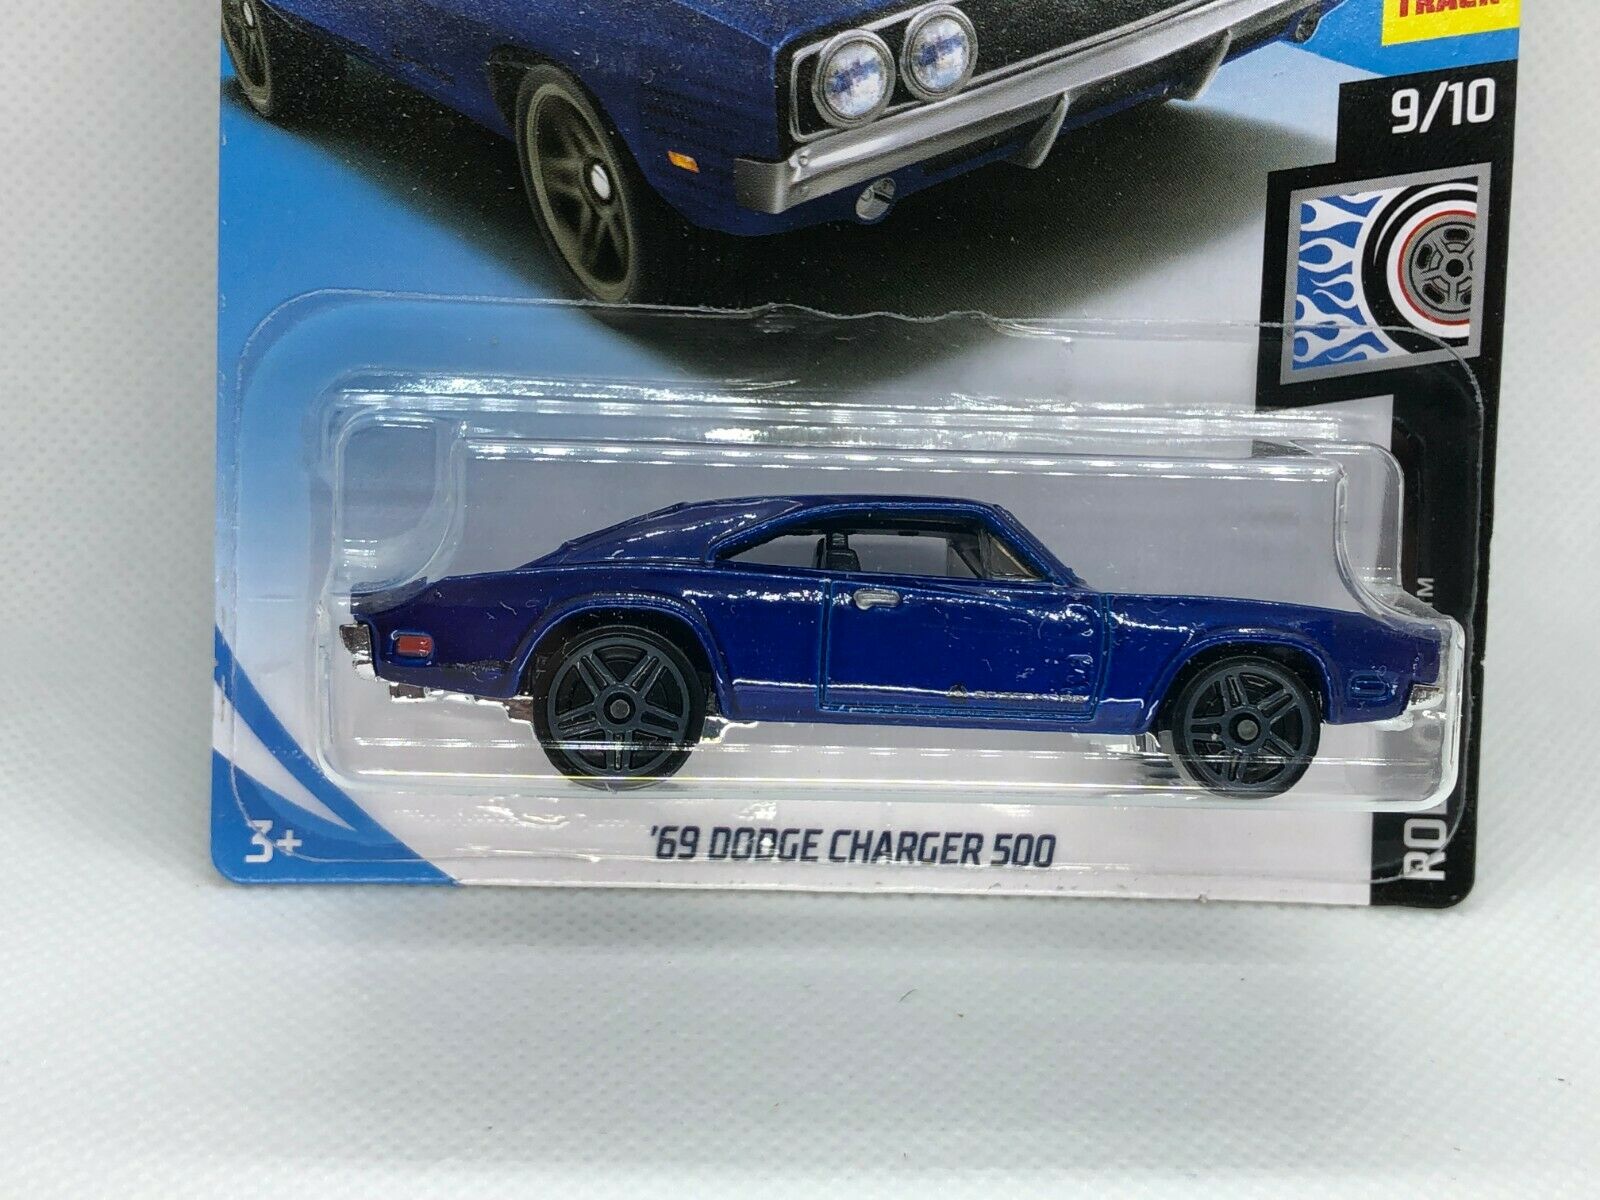 69 Dodge Charger 500